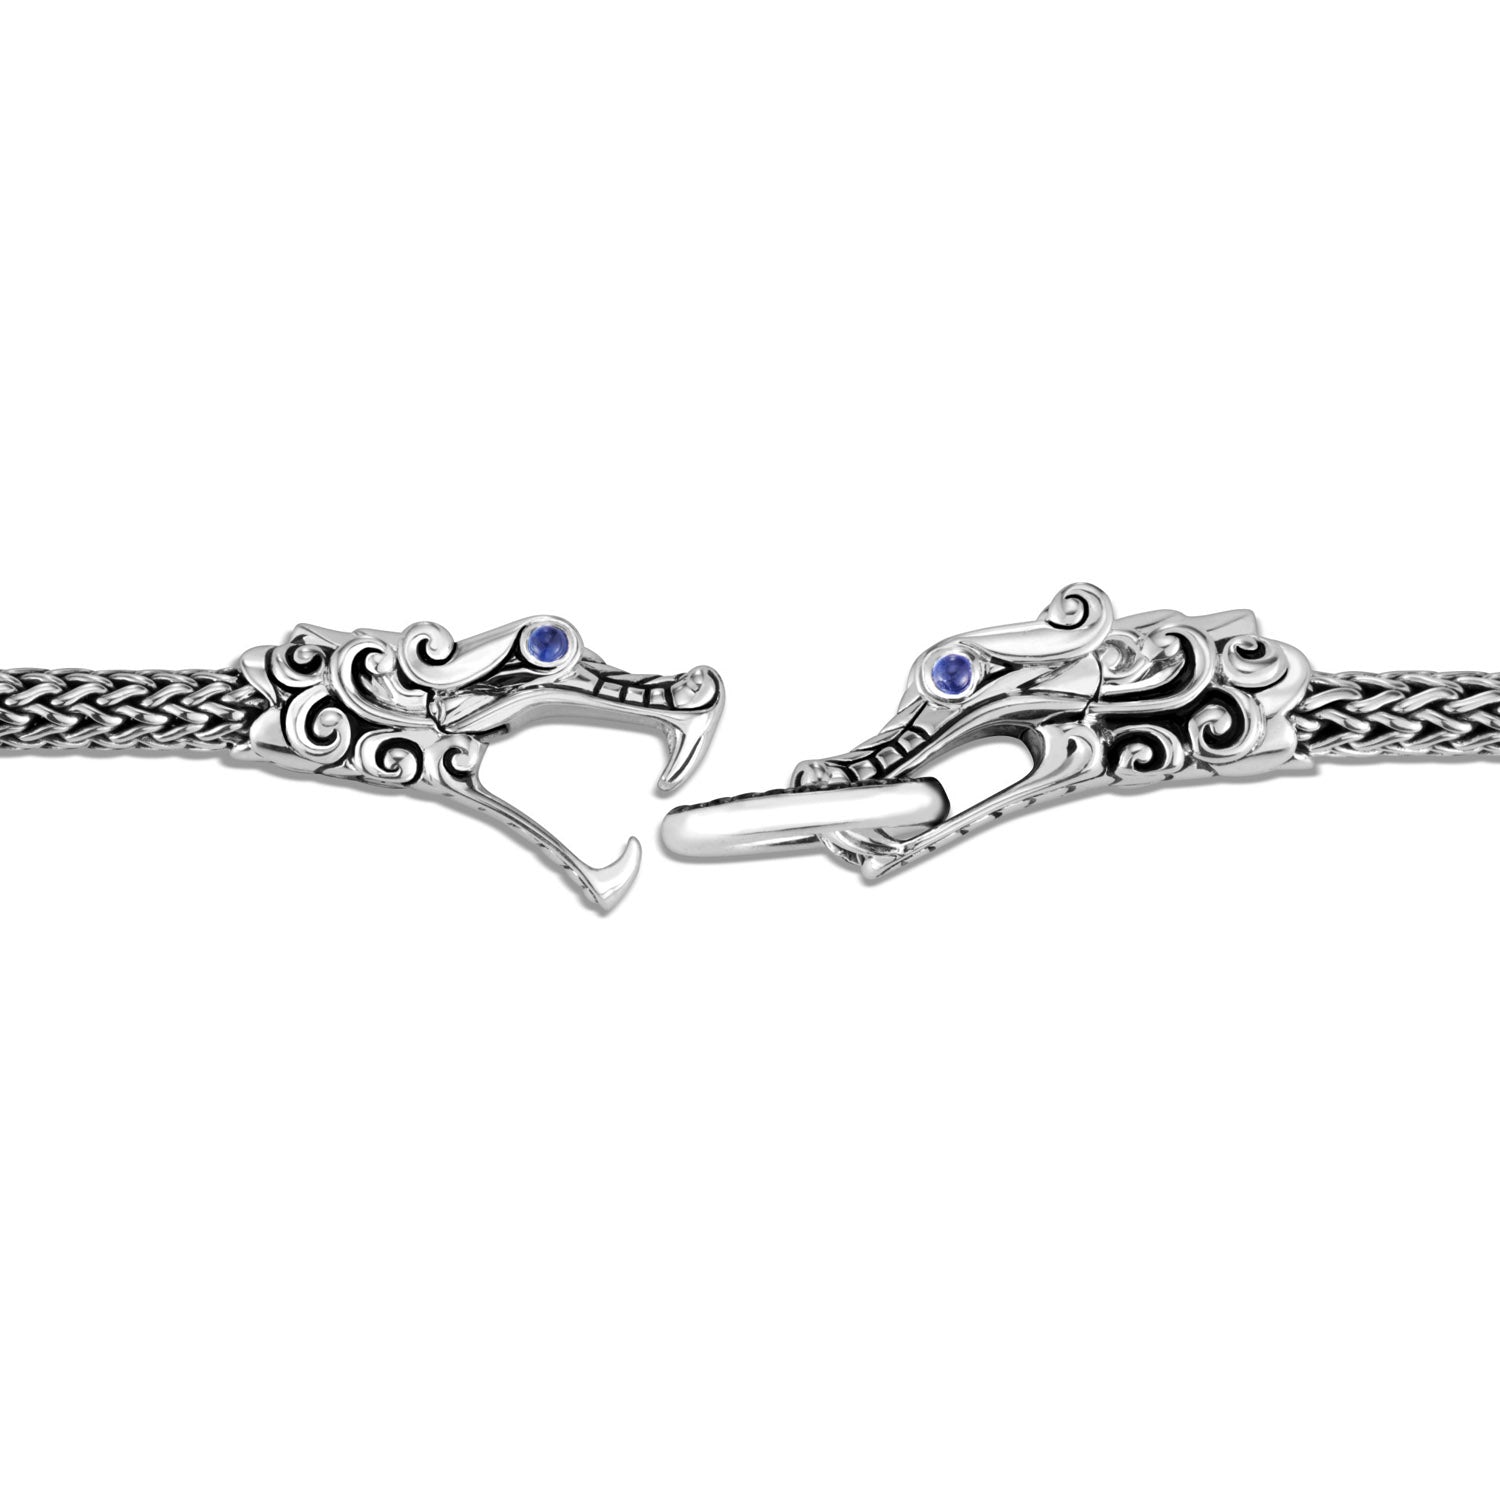 John Hardy Legends Naga Collection Double Dragon Bracelet with Black and Blue Sapphires and Black Spinel in Sterling Silver